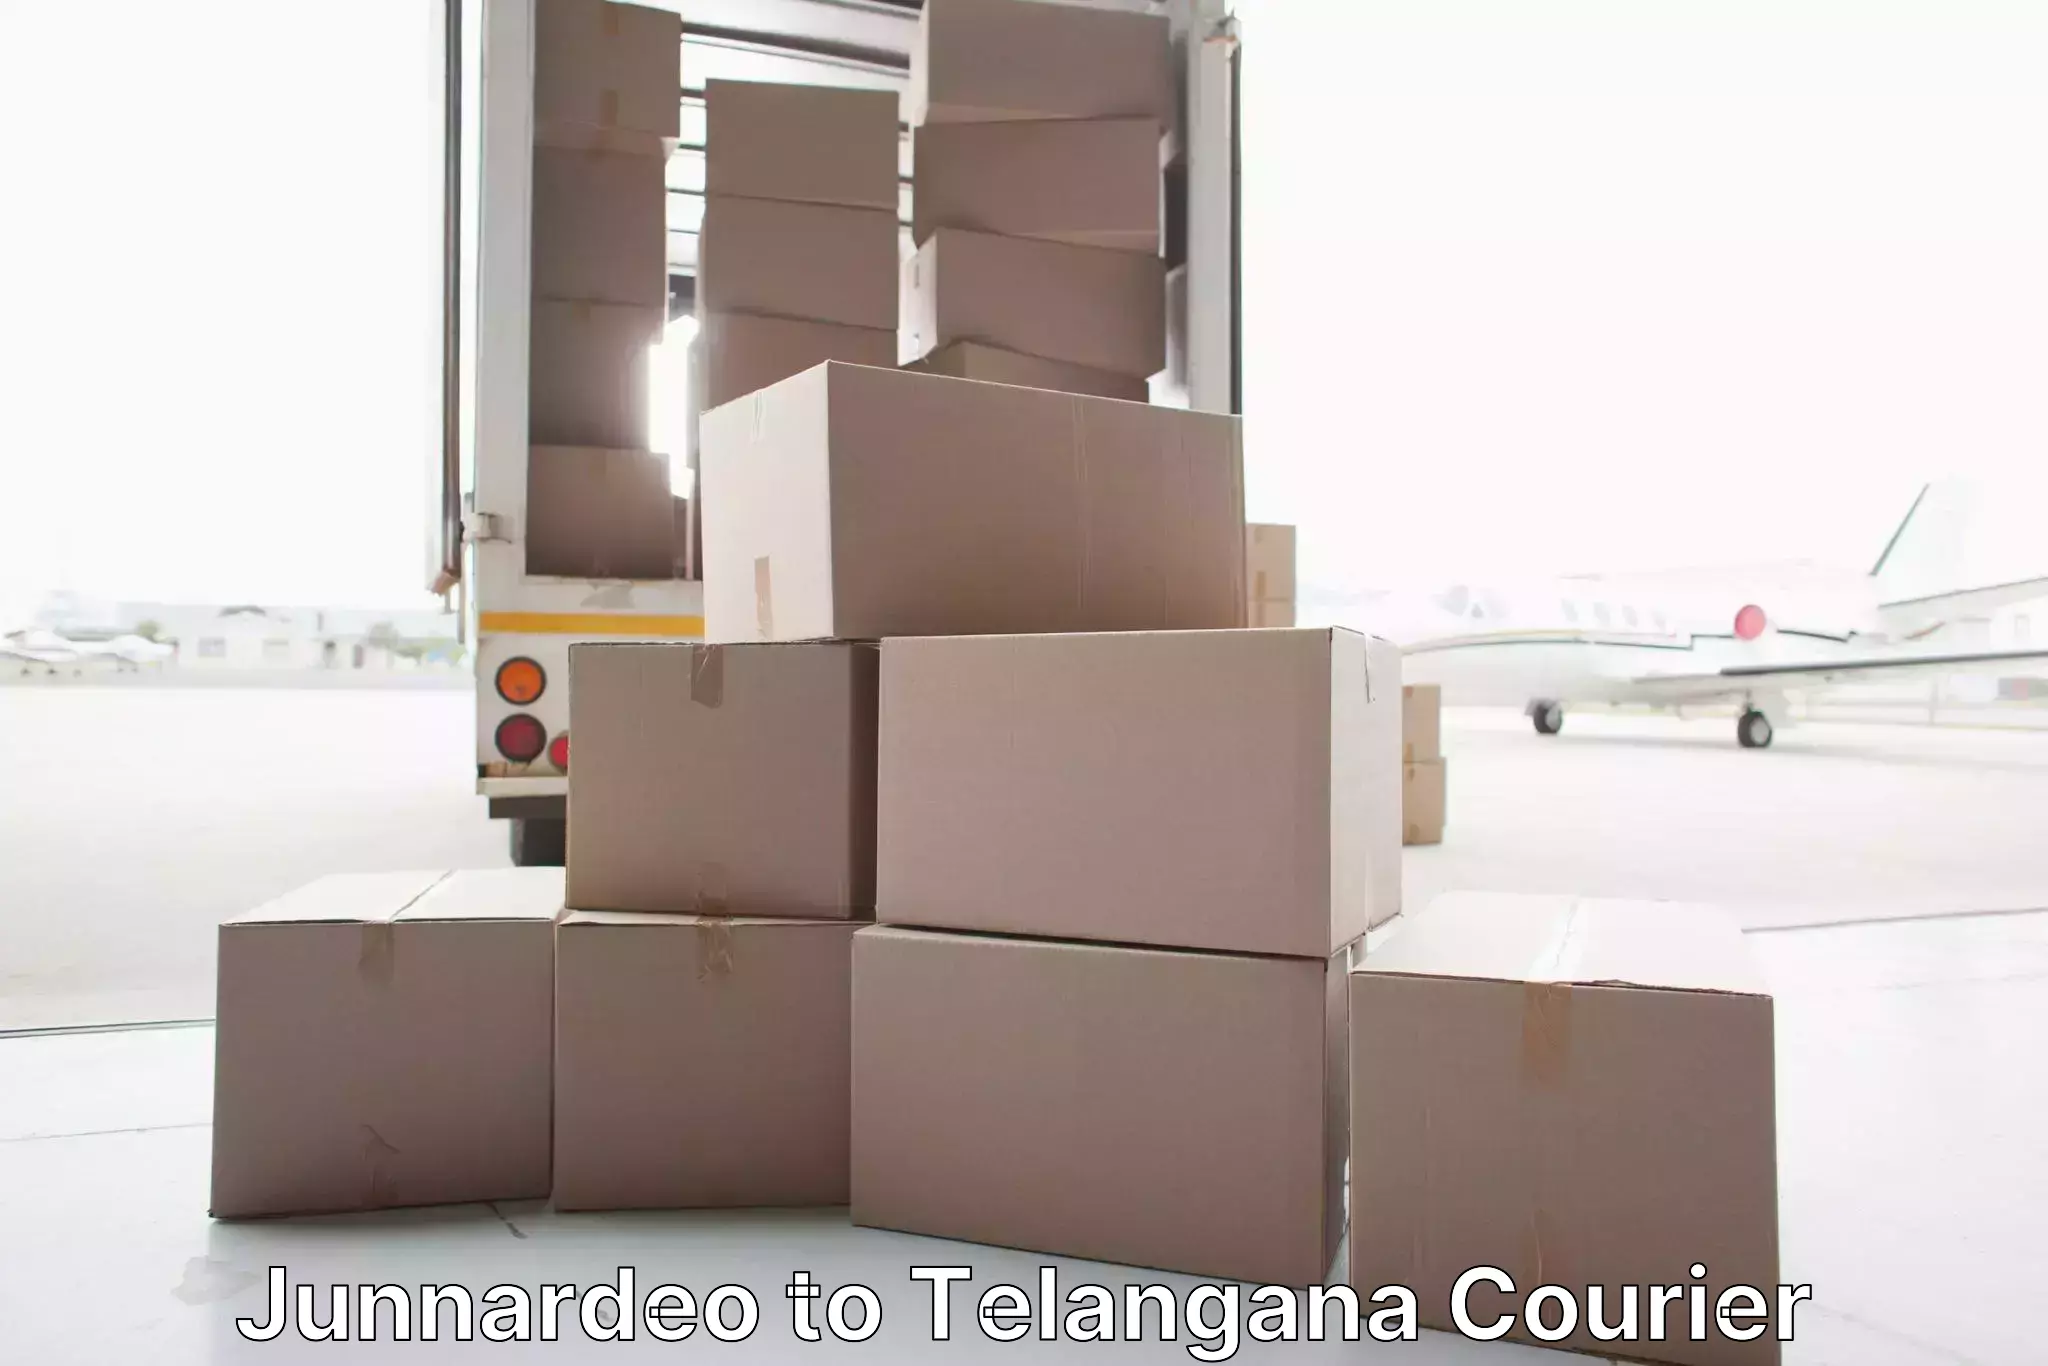 Furniture delivery service Junnardeo to Kaghaznagar